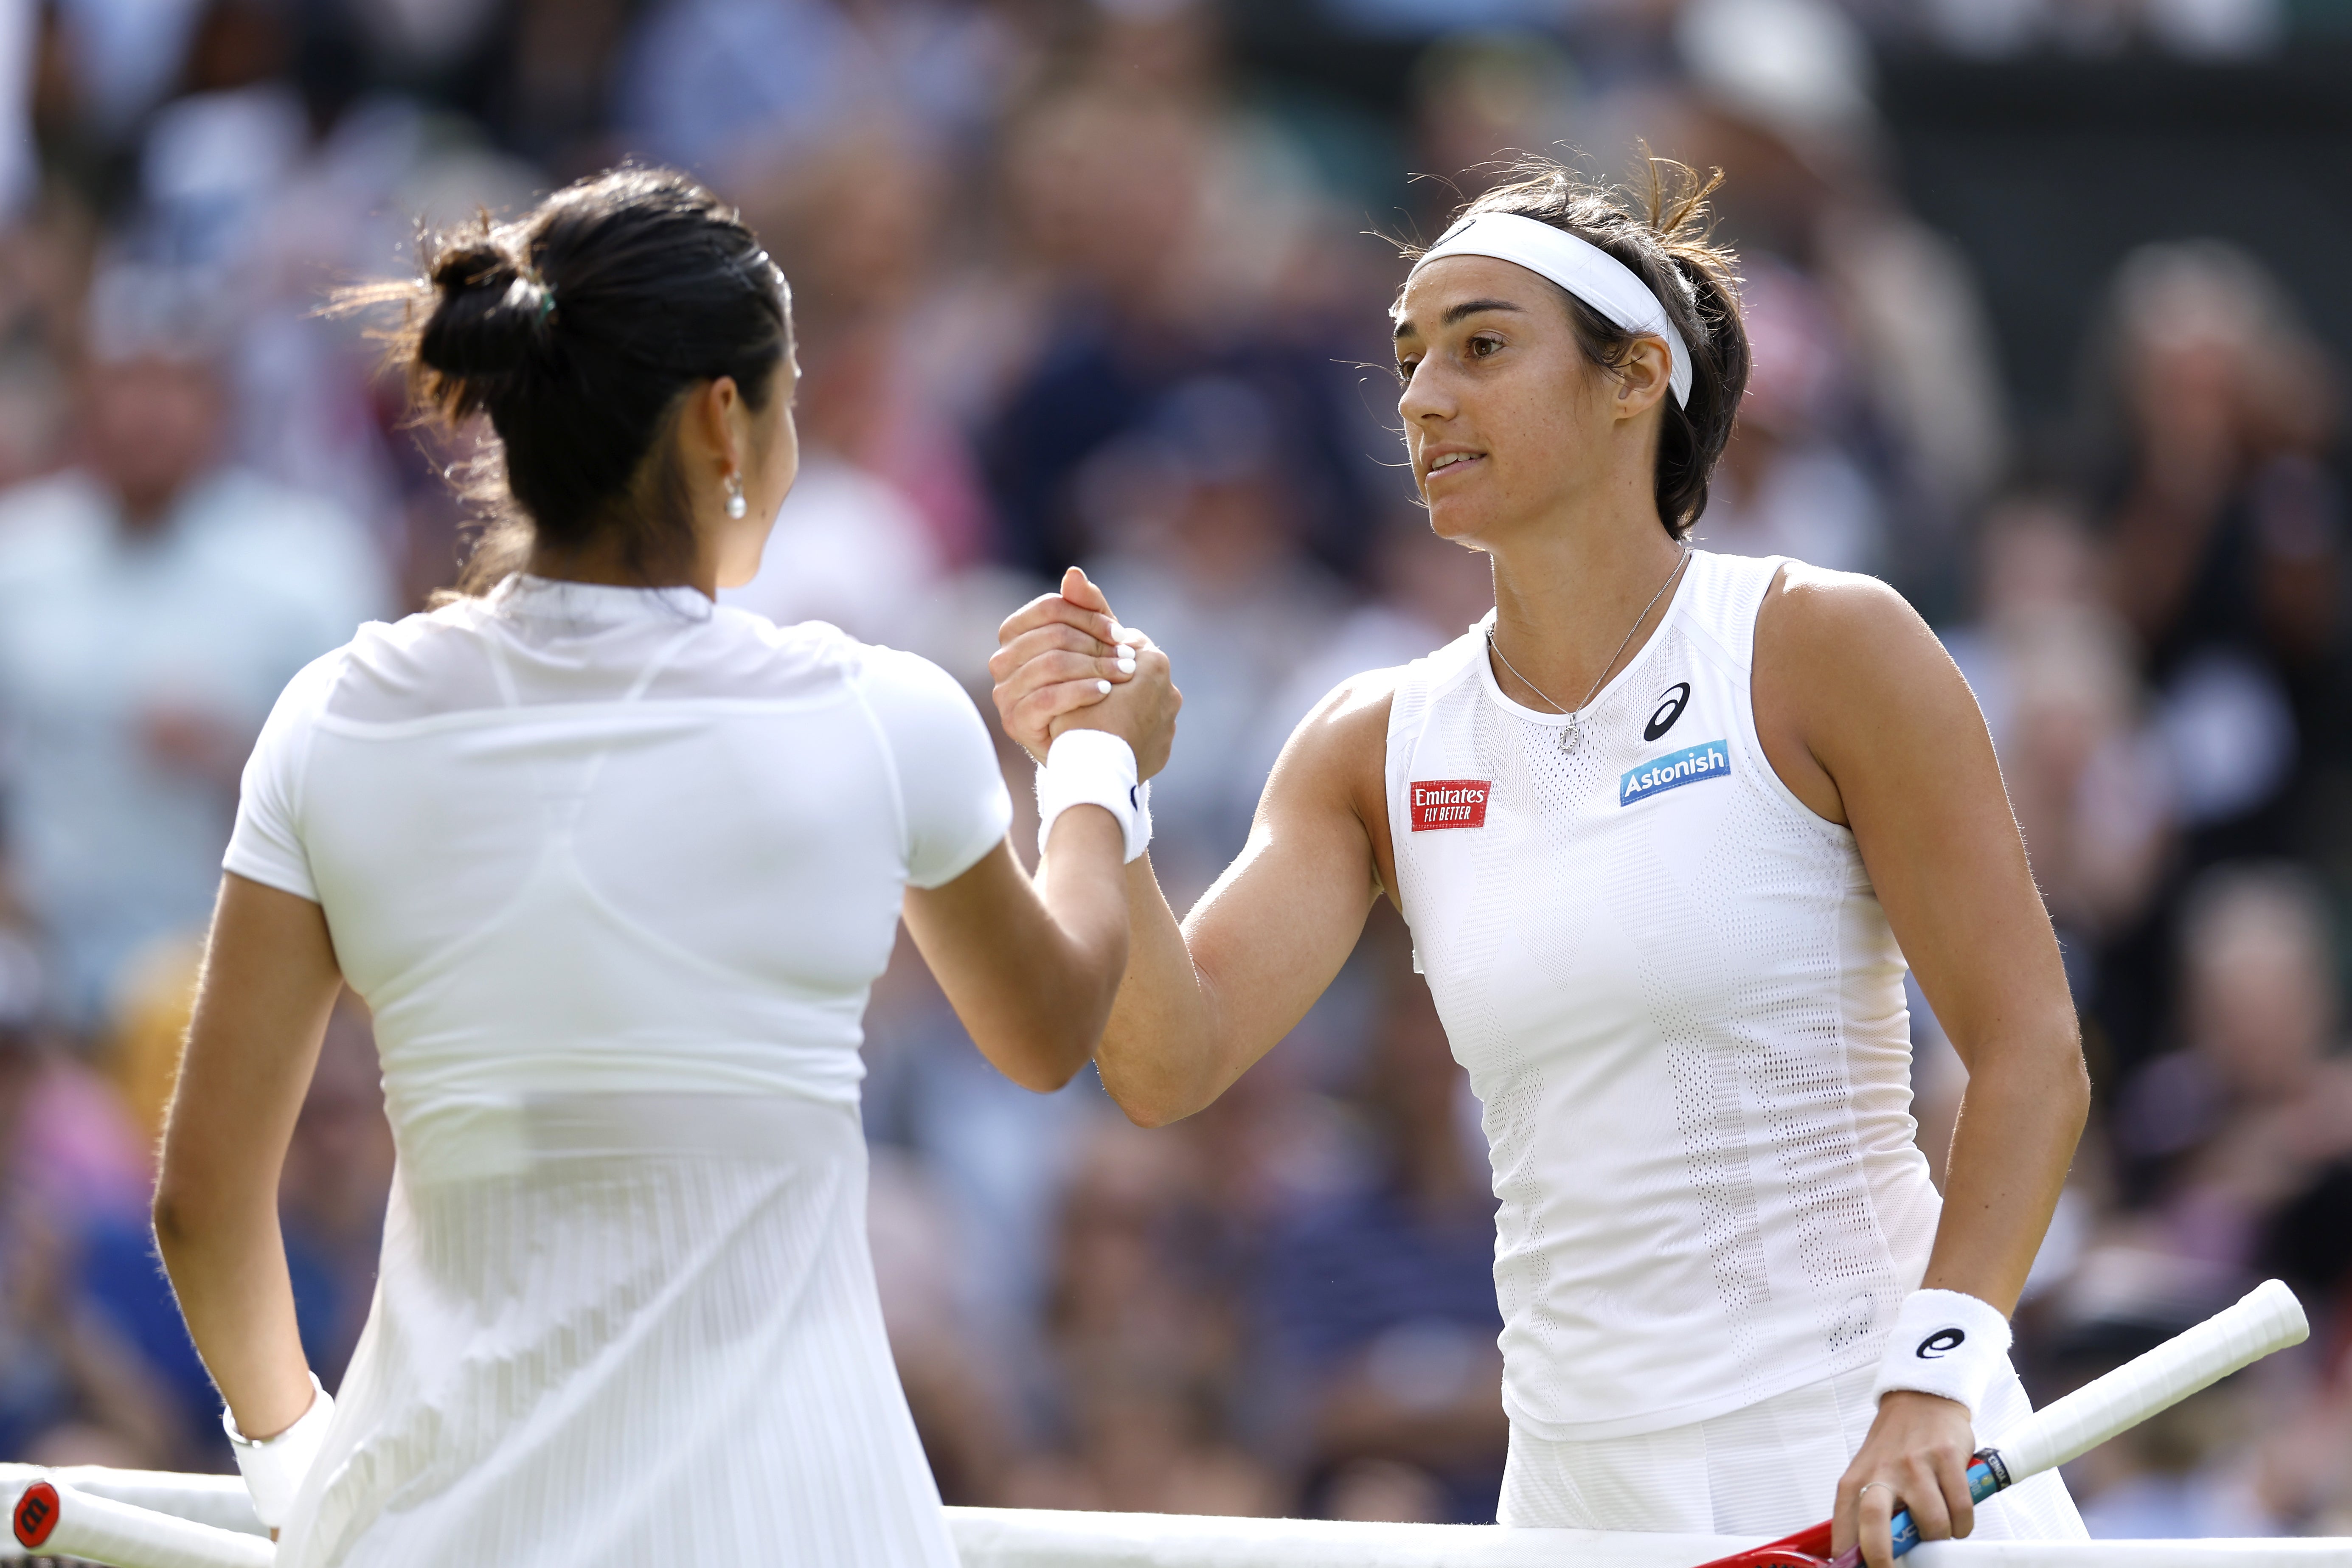 France’s Caroline Garcia (right) shakes hands with Great Britain’s Emma Raducanu after victory in the second round match on Centre Court (Steven Paston/PA)